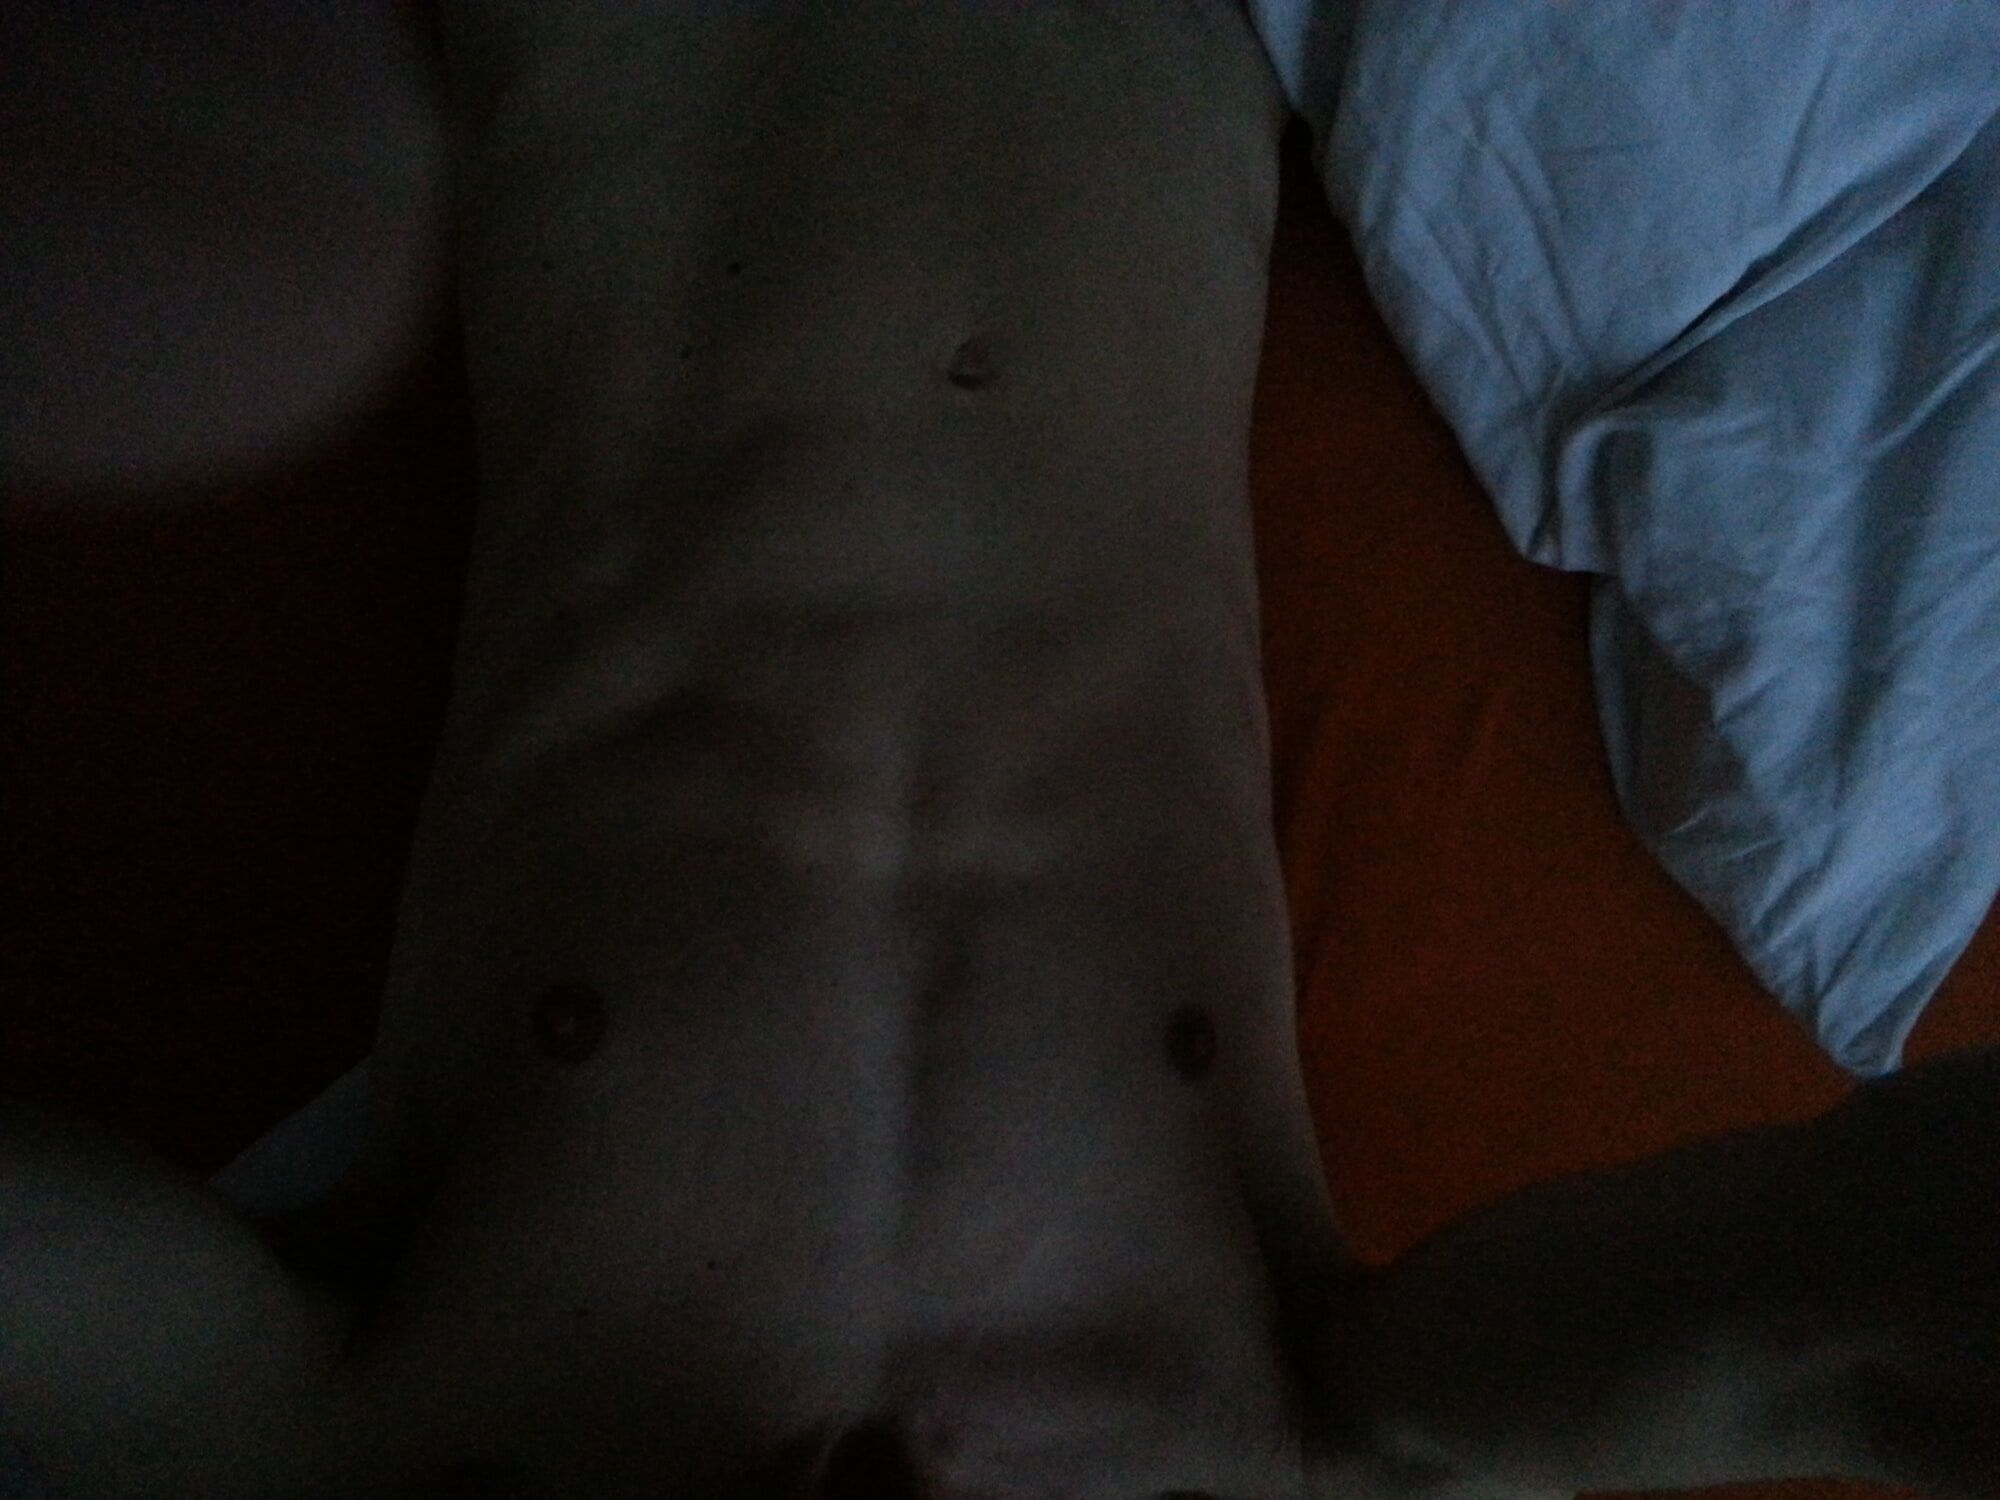 Some more pics of me - cock and body (older and newer ones) #7